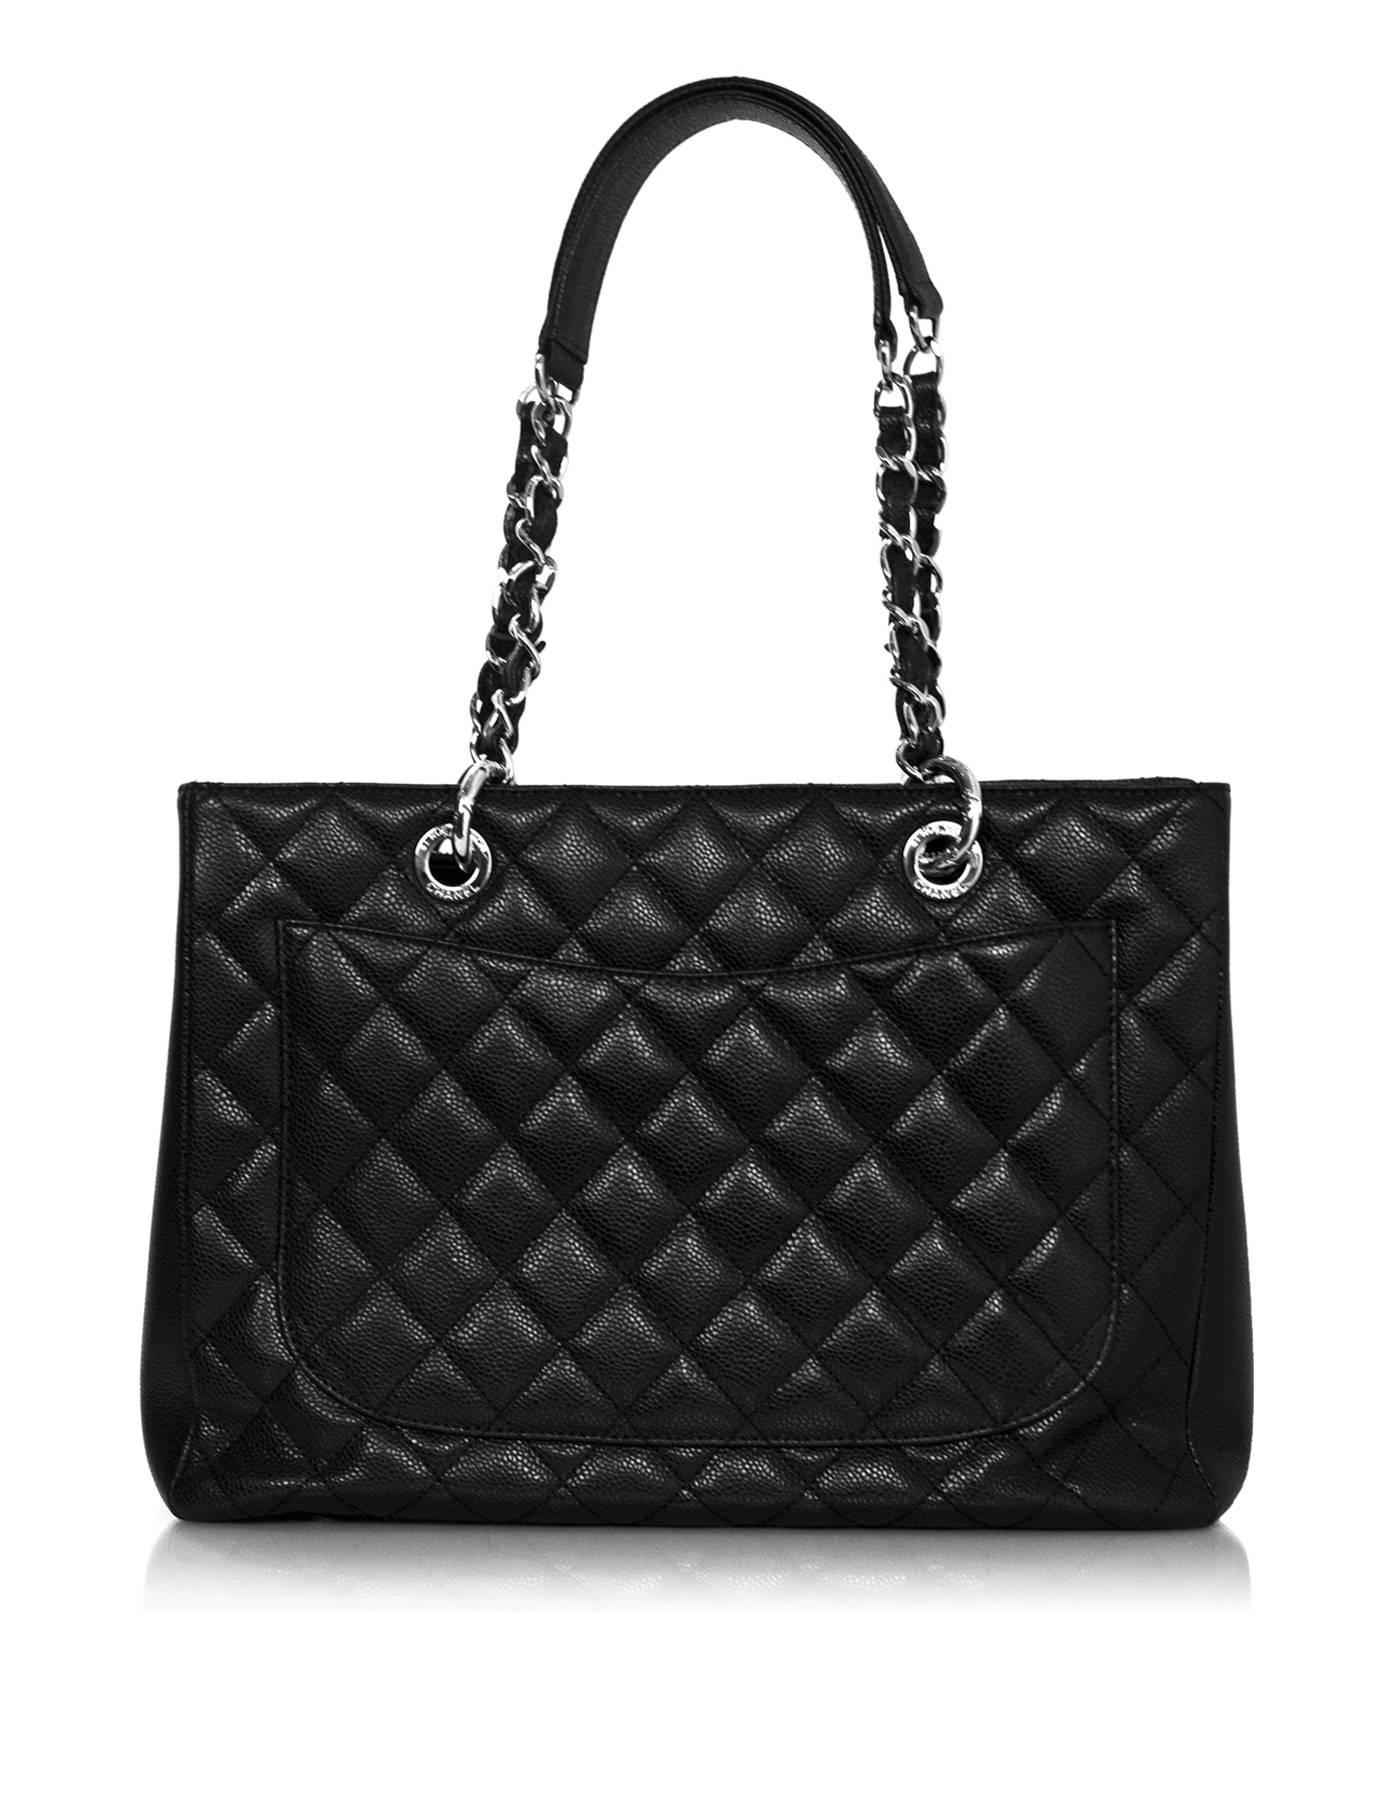 Chanel Black Caviar Leather GST Grand Shopper Tote Bag with SHW In Excellent Condition In New York, NY